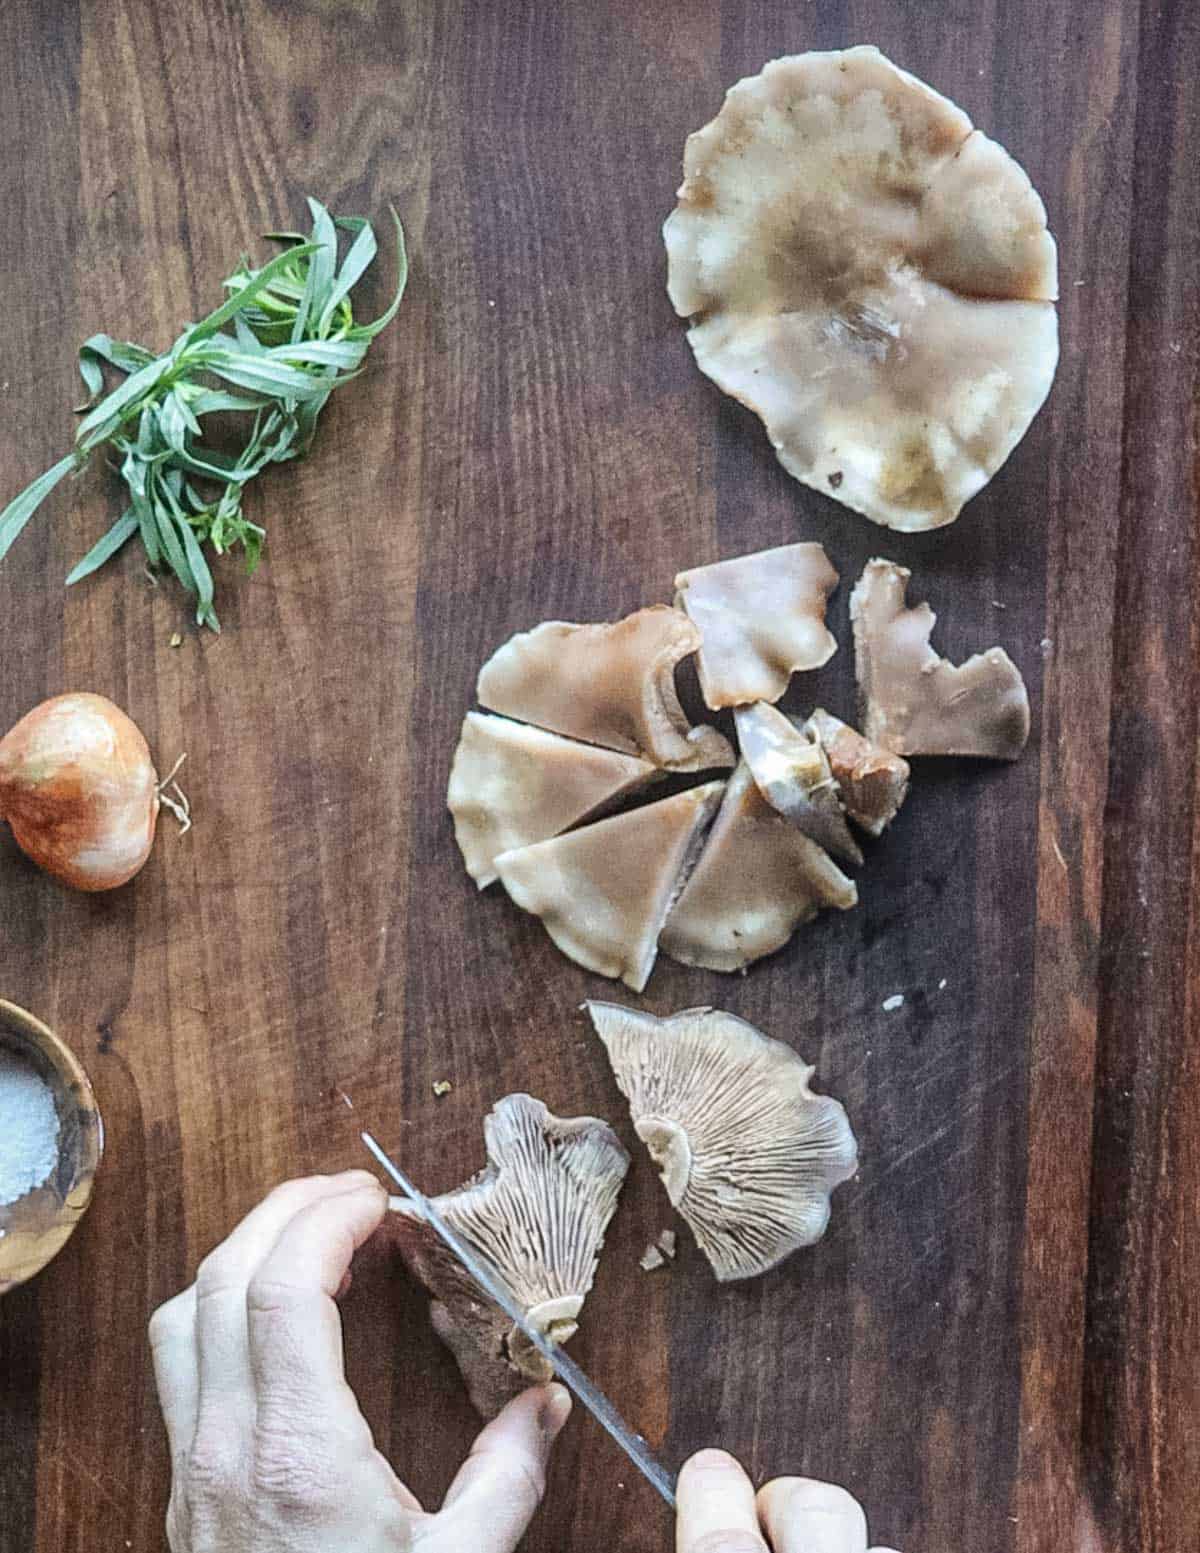 Cutting wood blewit mushrooms into pieces. 